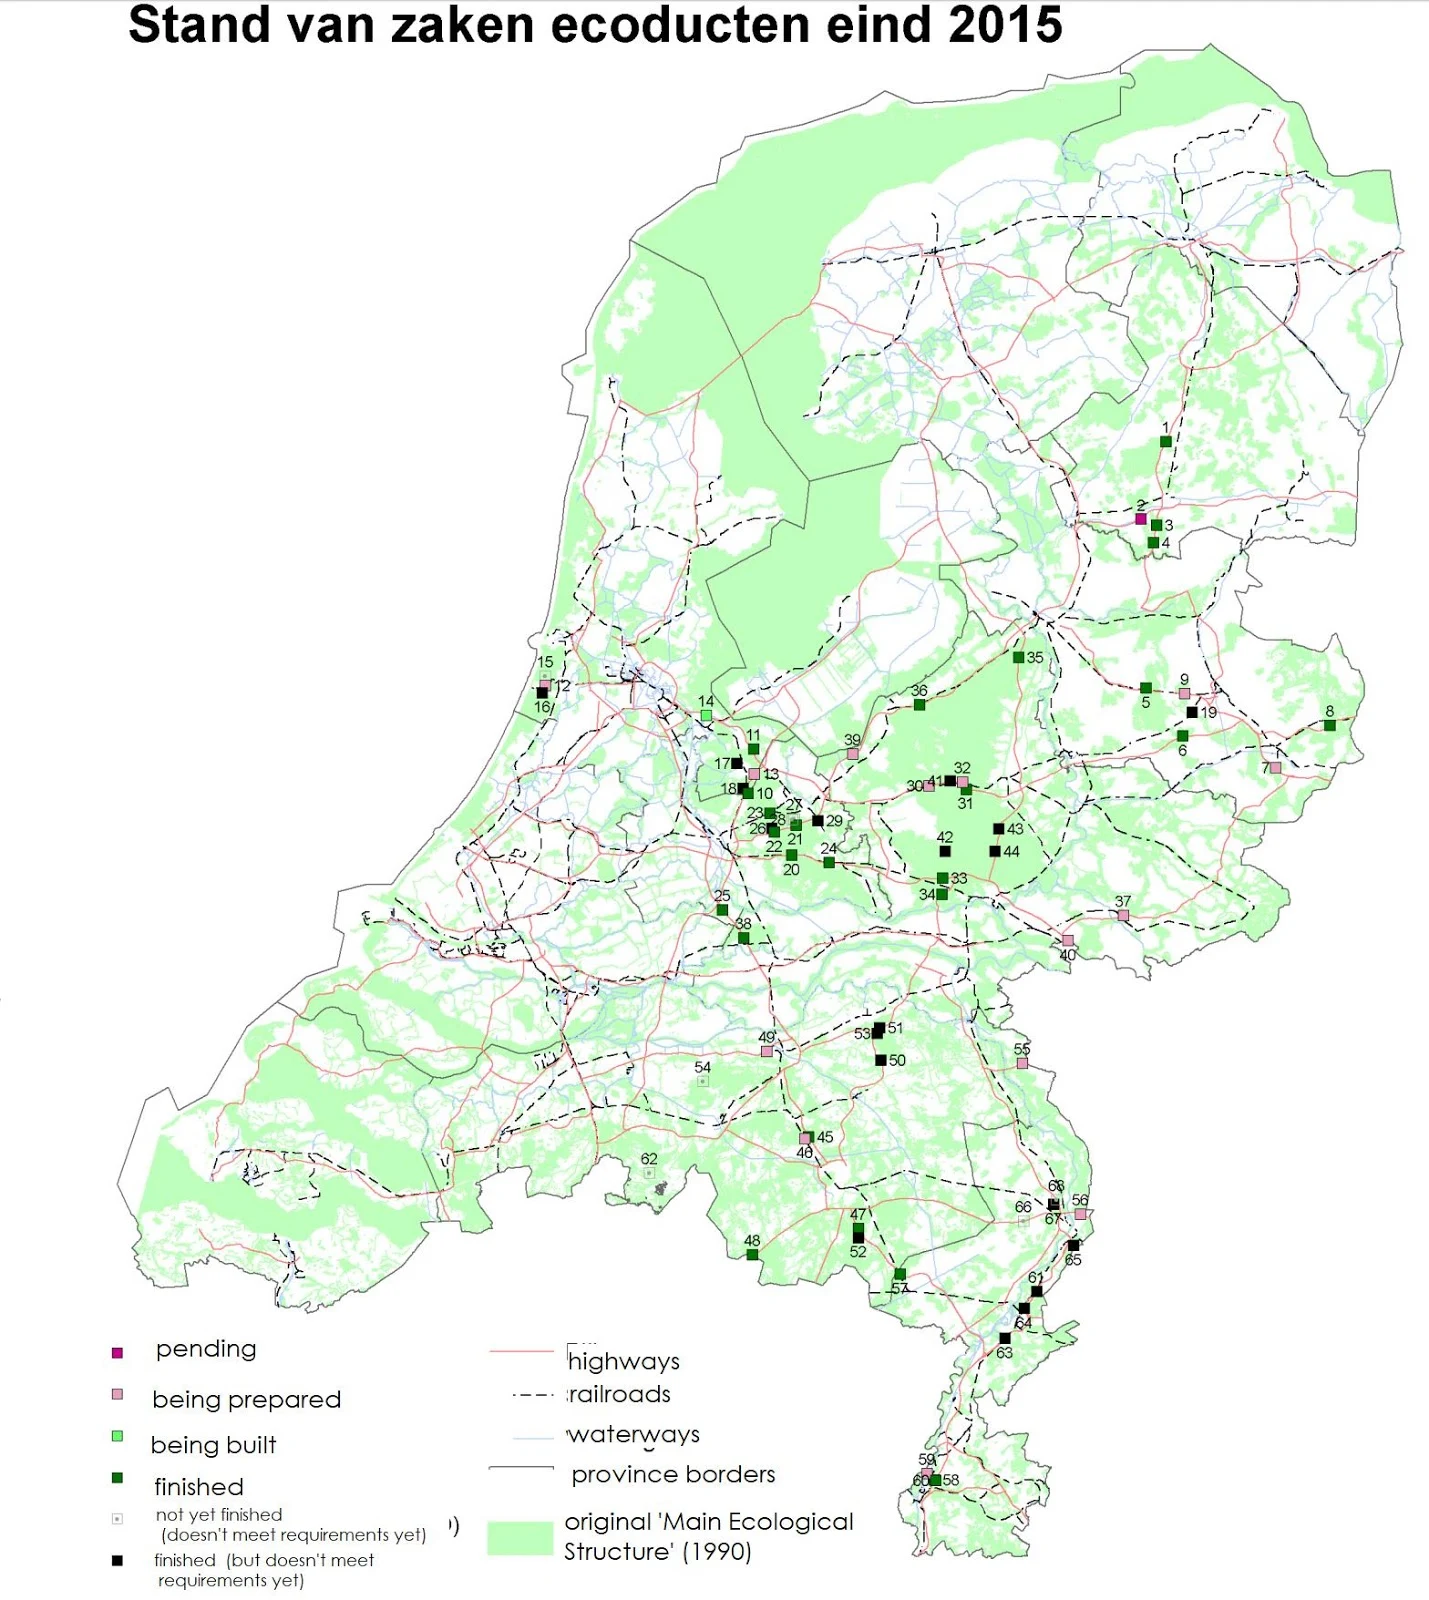 Ecoducts in the Netherlands